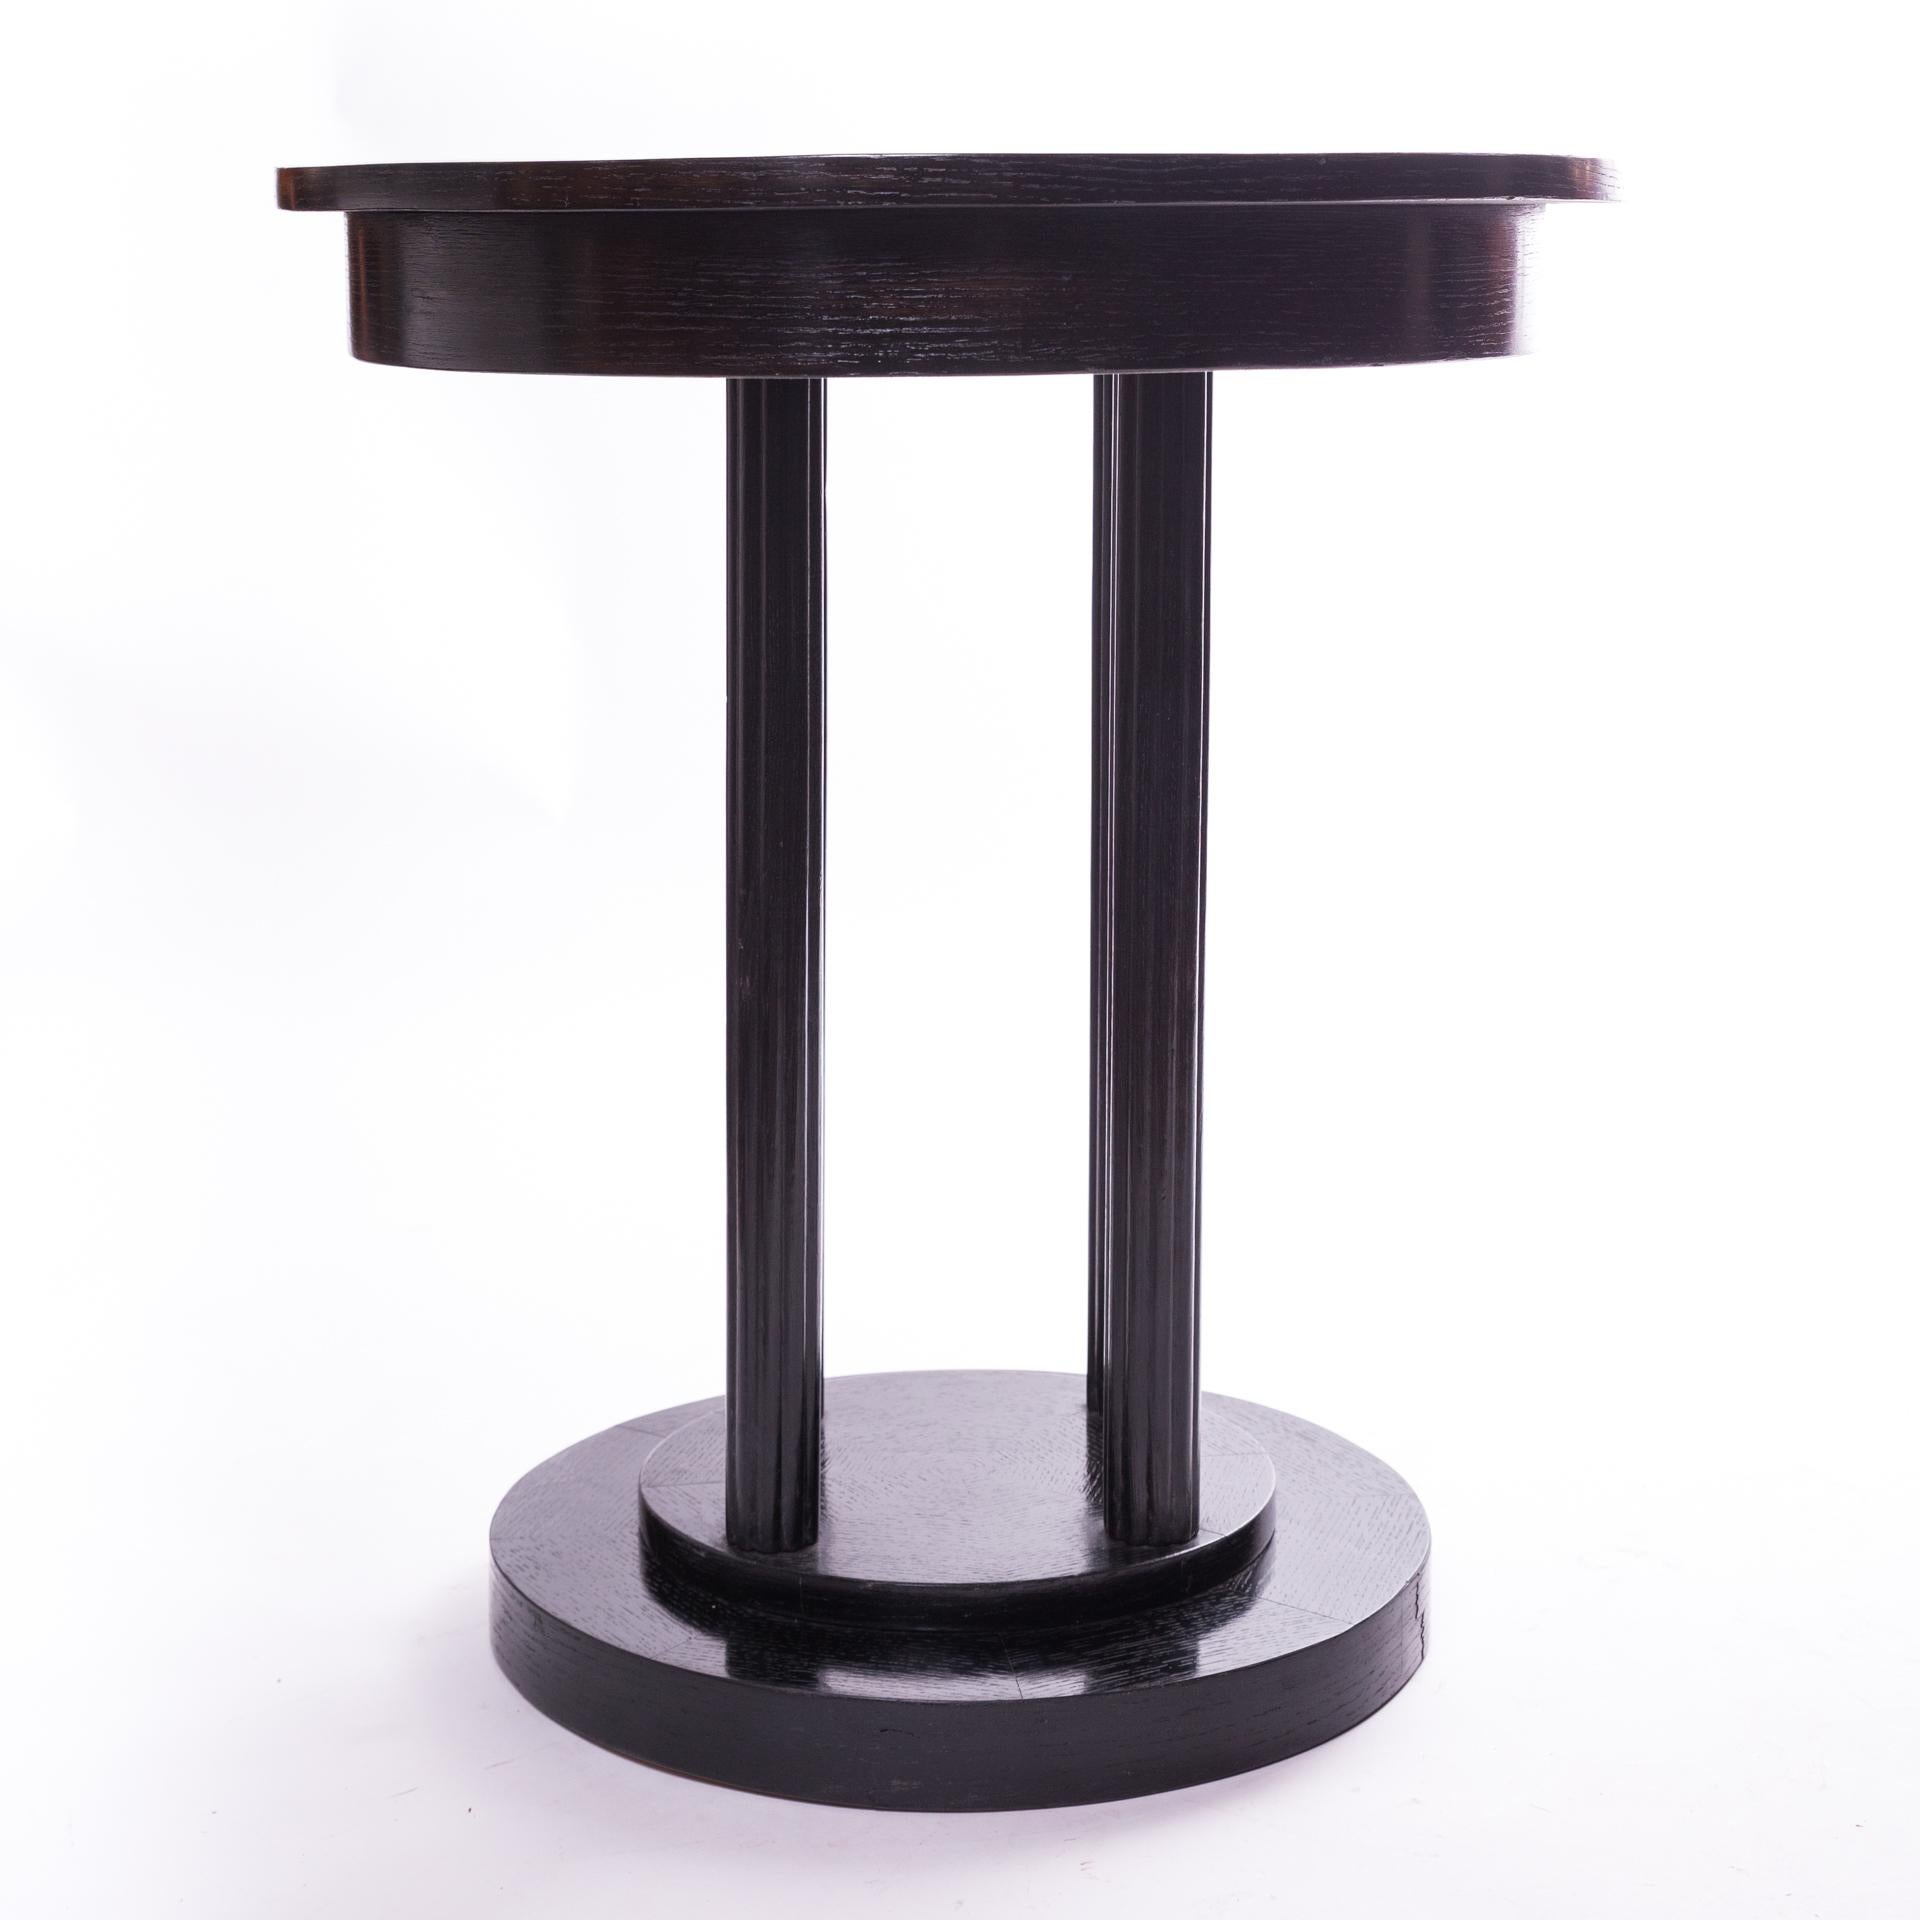 Black Art Deco table, referring in form to Viennese Thonet furniture. It comes from 1910-1920. Wooden, black stained and polished. Visible wood structure.